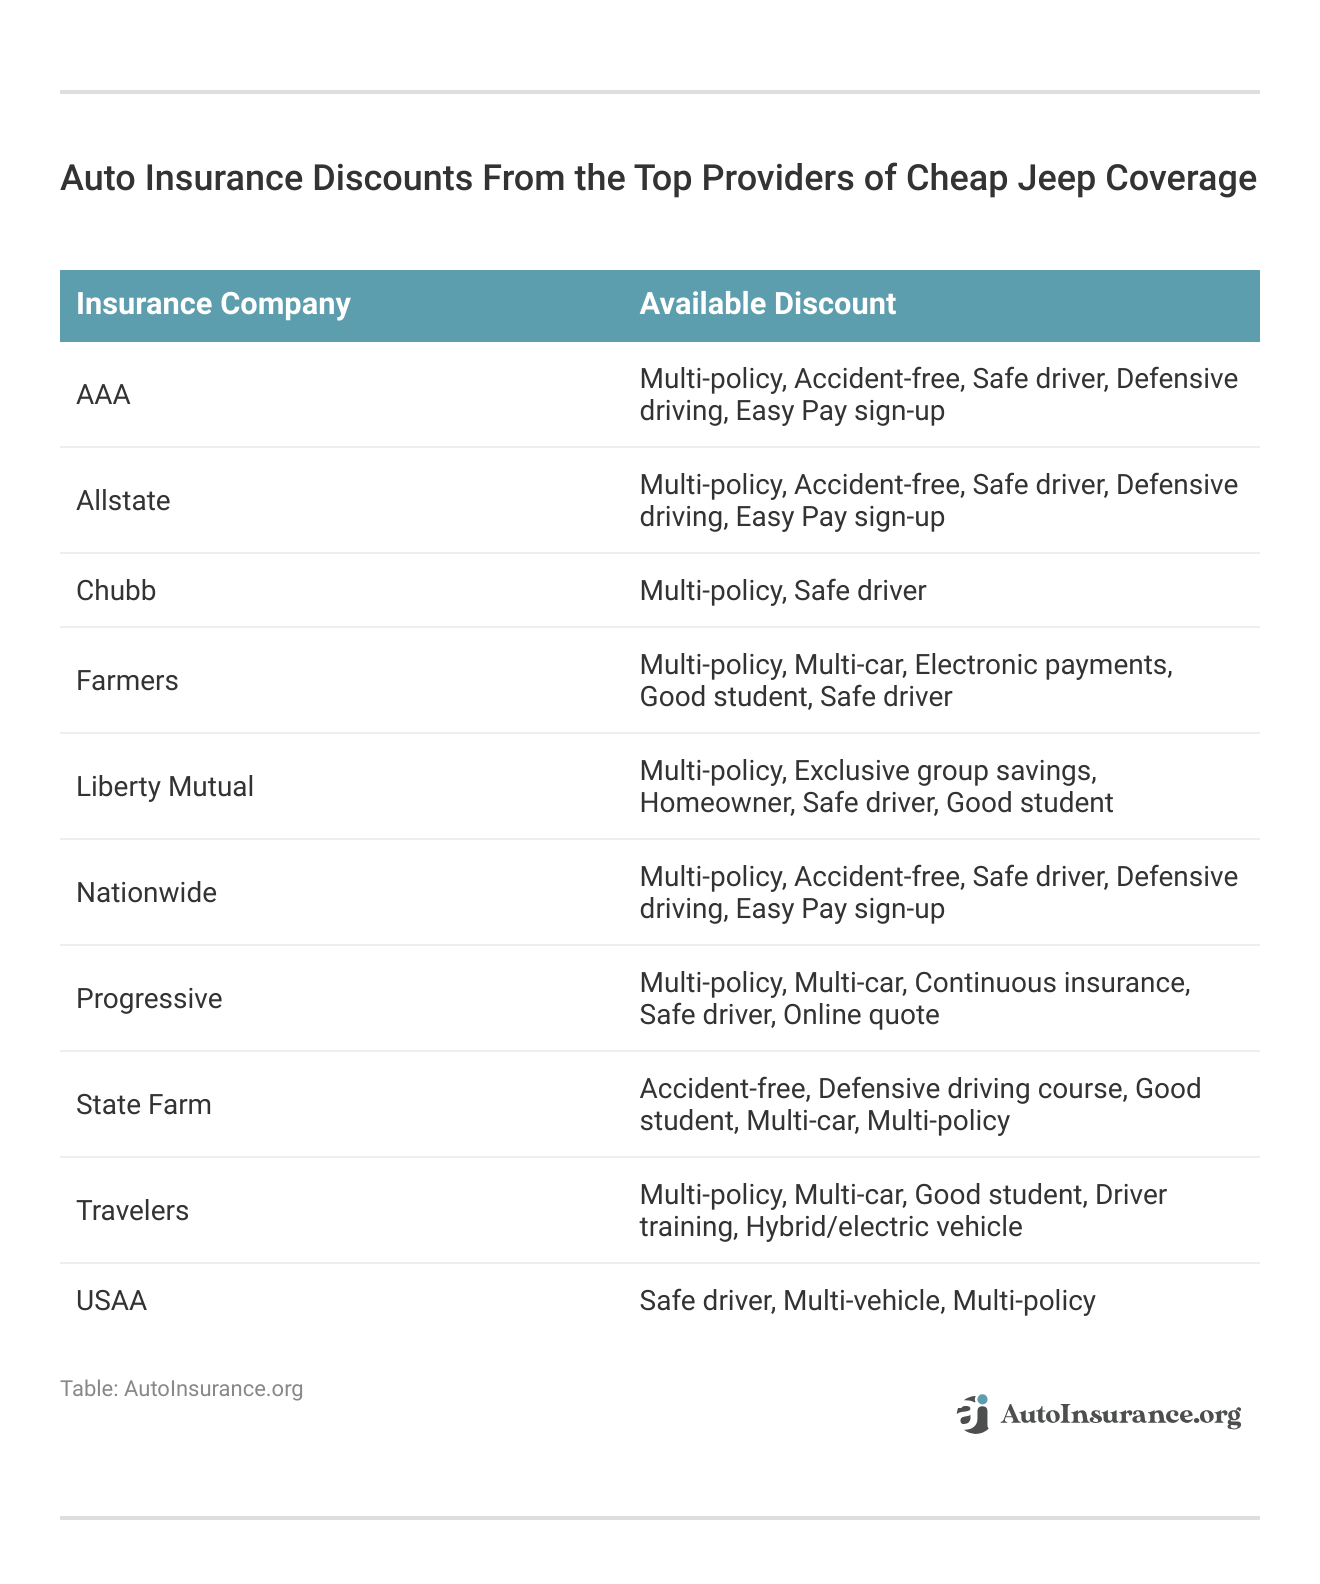 <h3>Auto Insurance Discounts From the Top Providers of Cheap Jeep Coverage</h3>